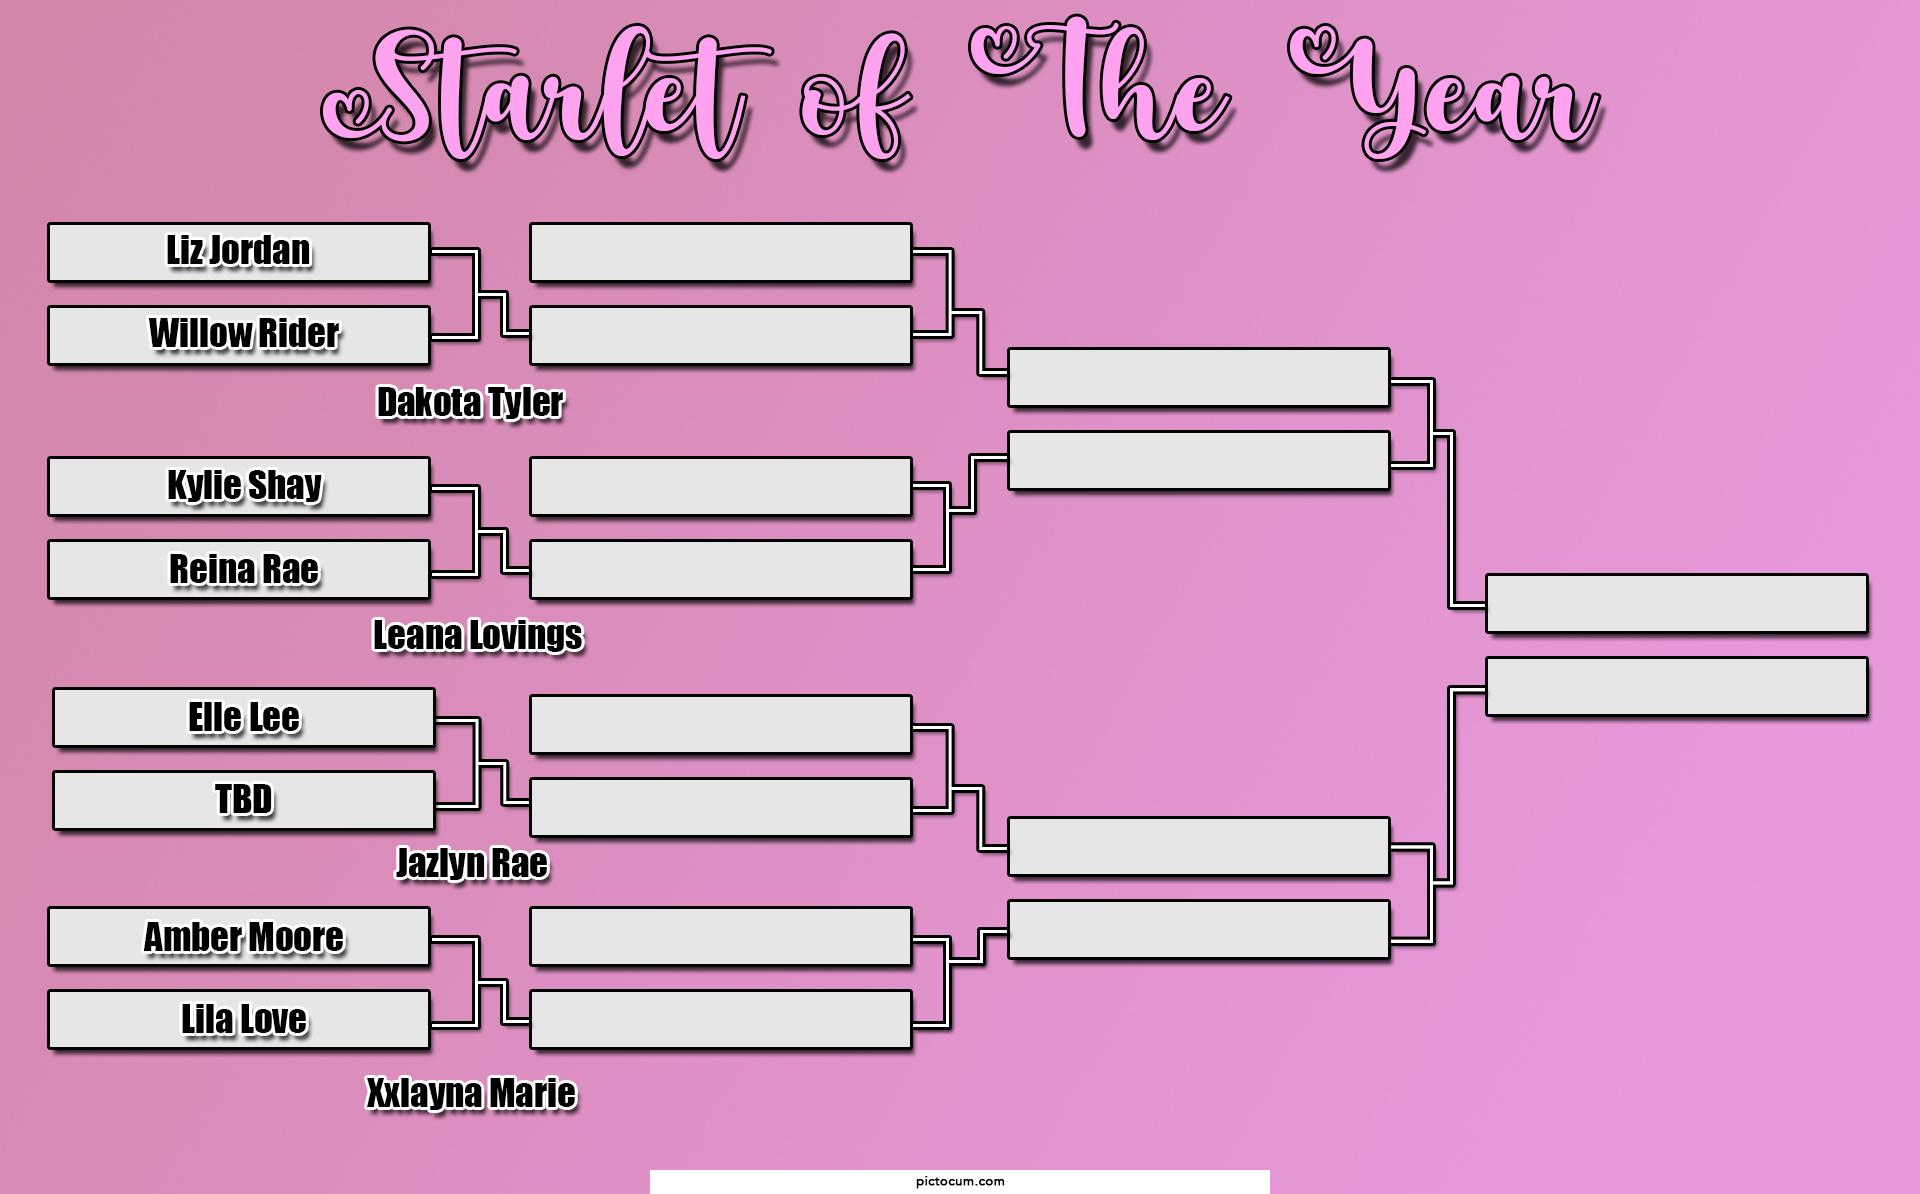  Starlet of The Year Bracket!